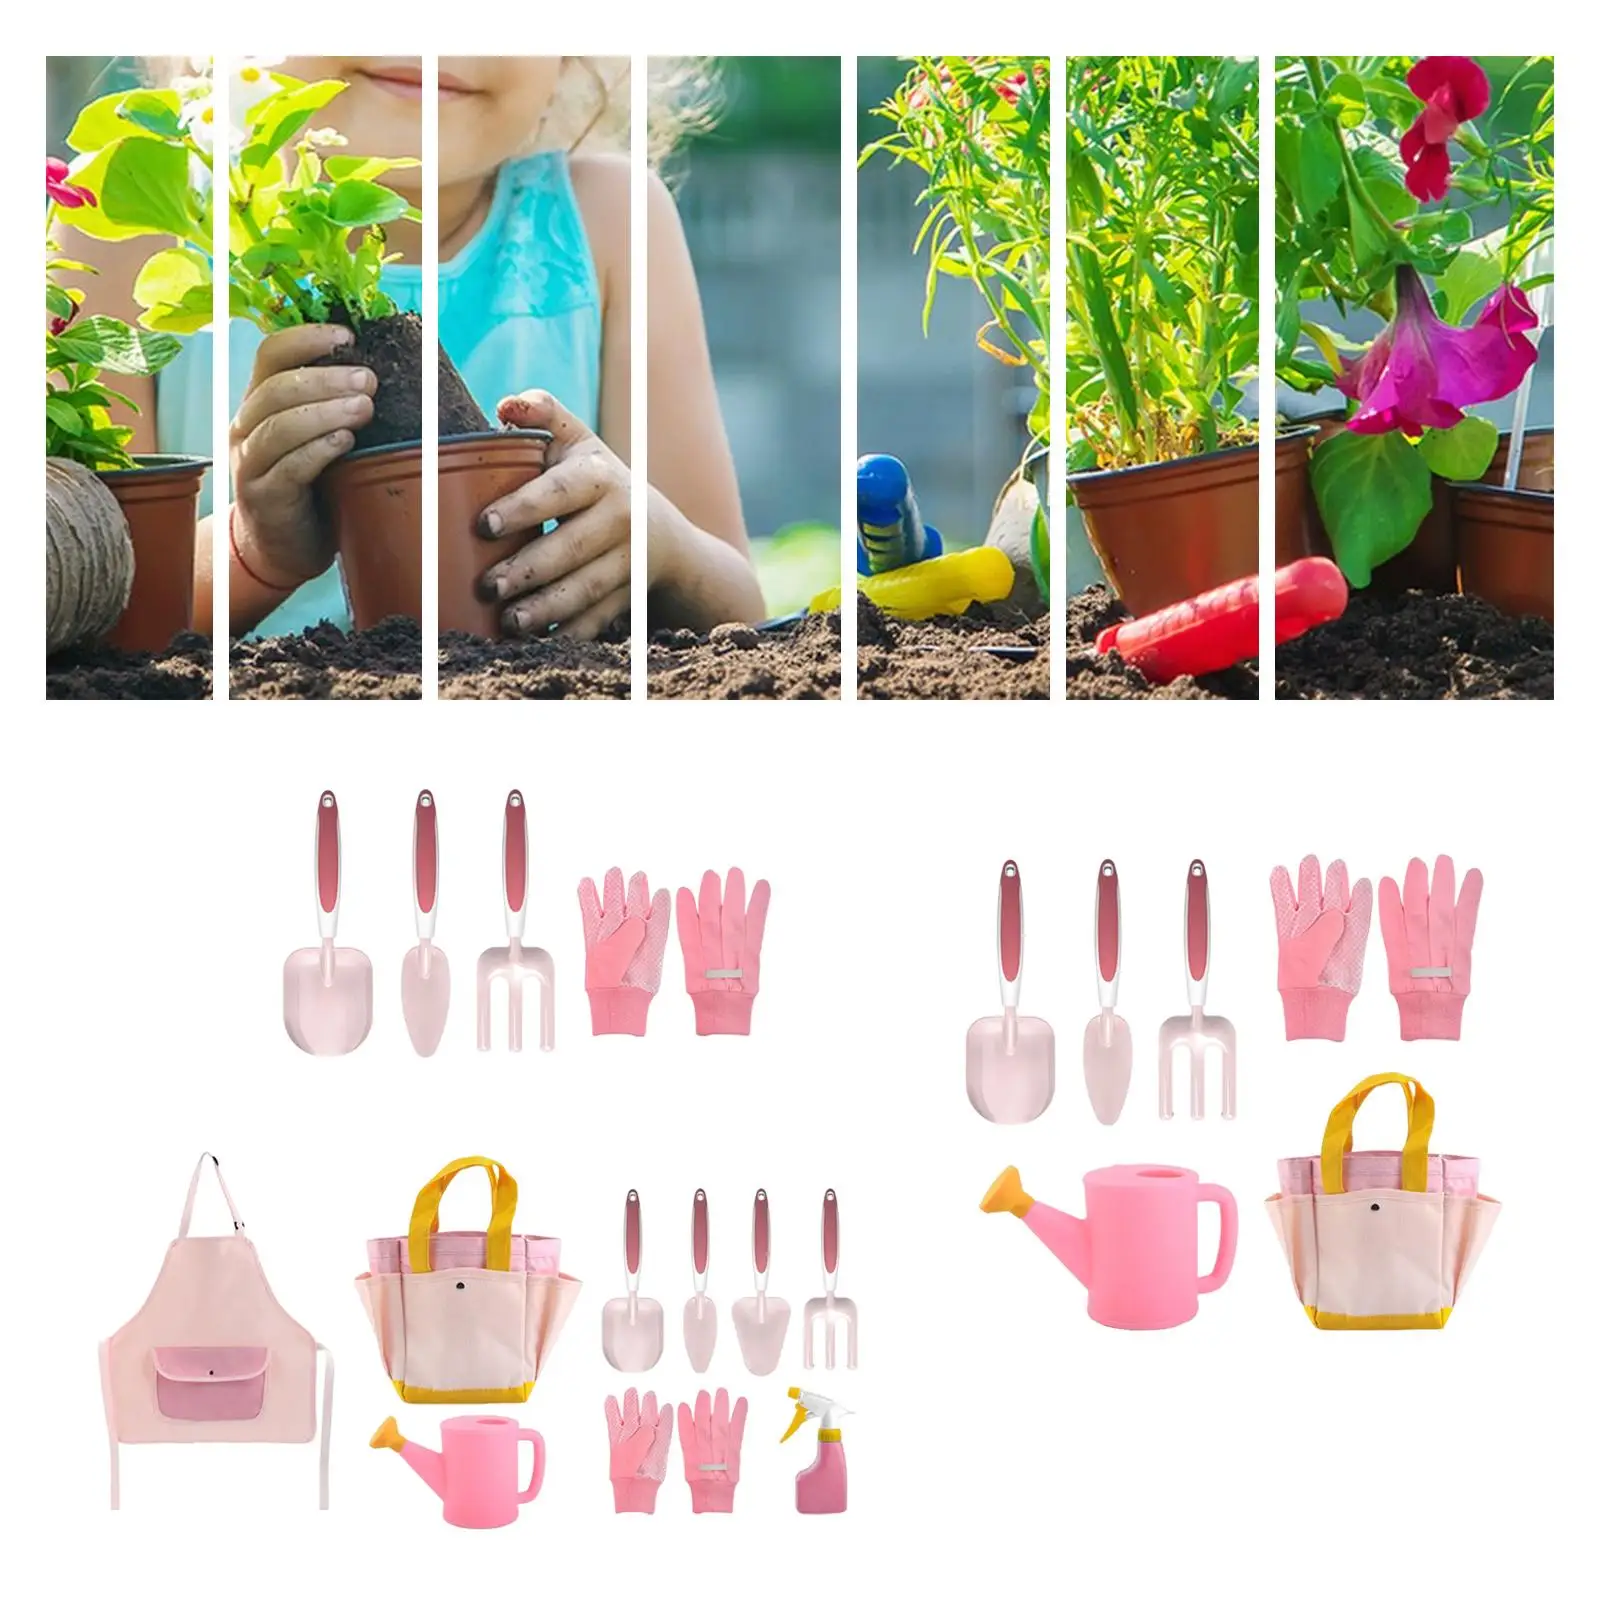 Kids Educational Gardening Tool Set Pink Practical Toys Great for Parent and Child Relationships Rounded Edges Sturdy Portable